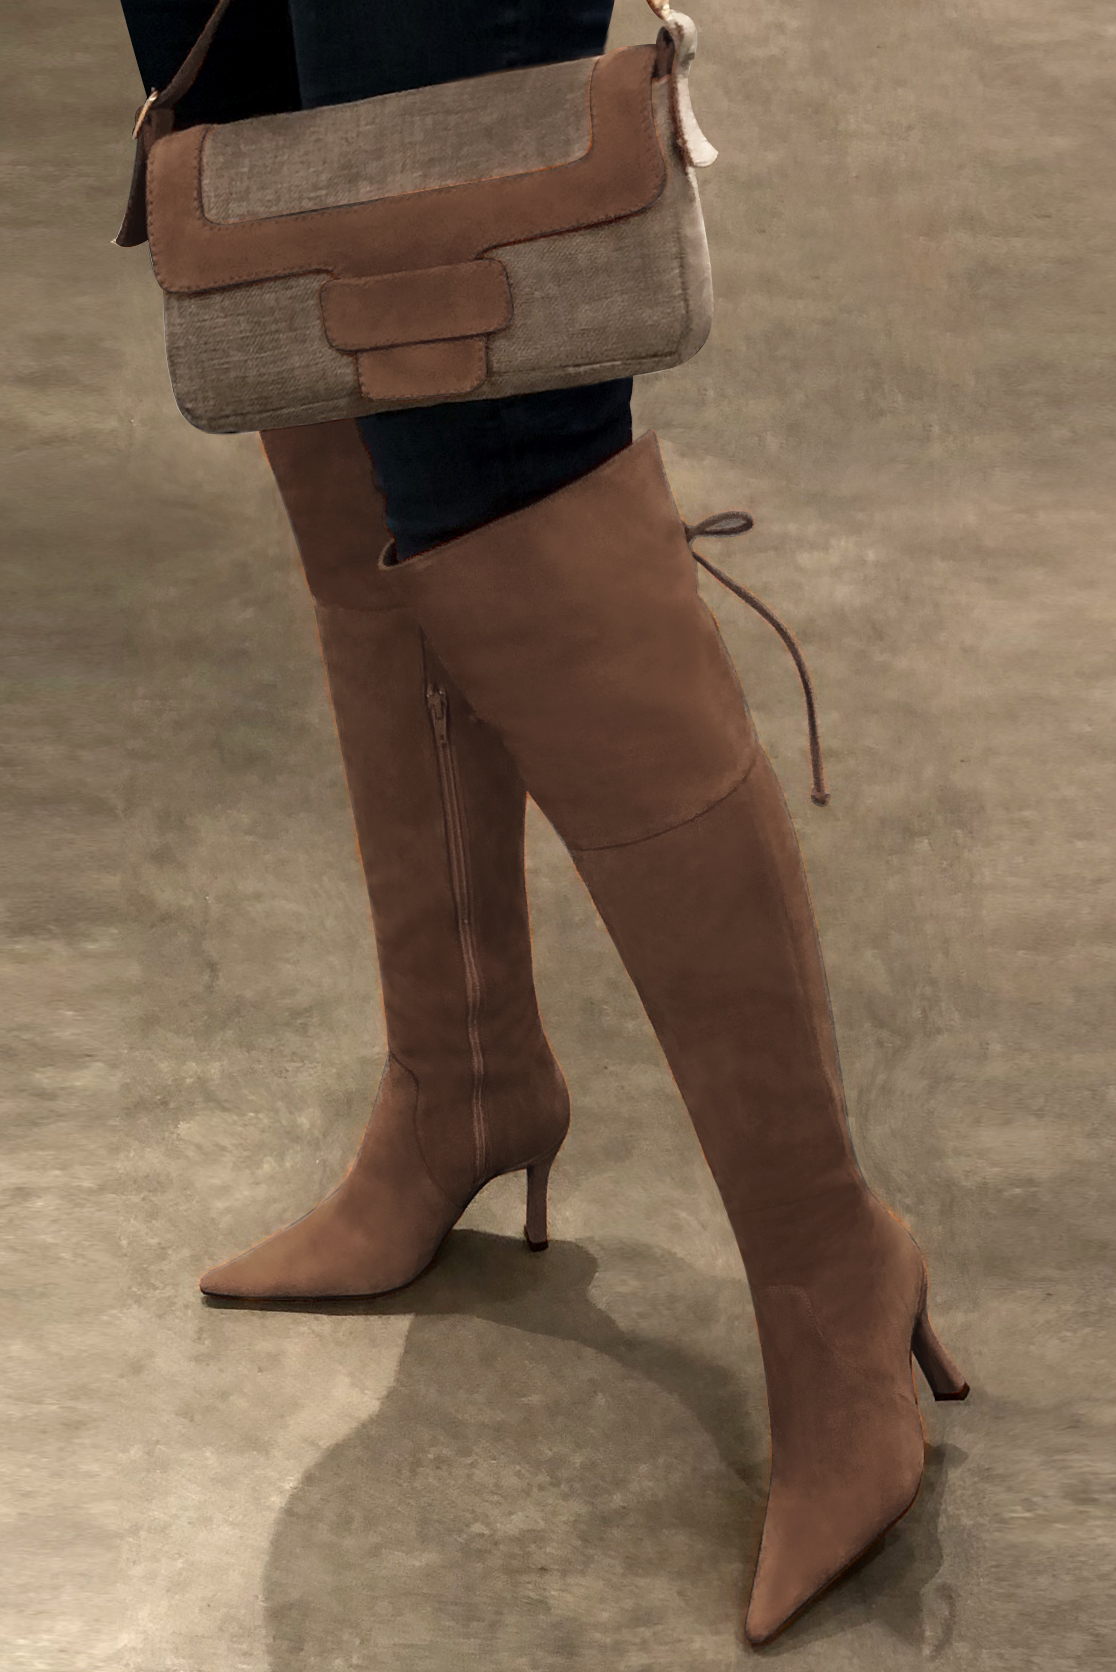 Chocolate brown women's leather thigh-high boots. Pointed toe. Very high spool heels. Made to measure. Worn view - Florence KOOIJMAN